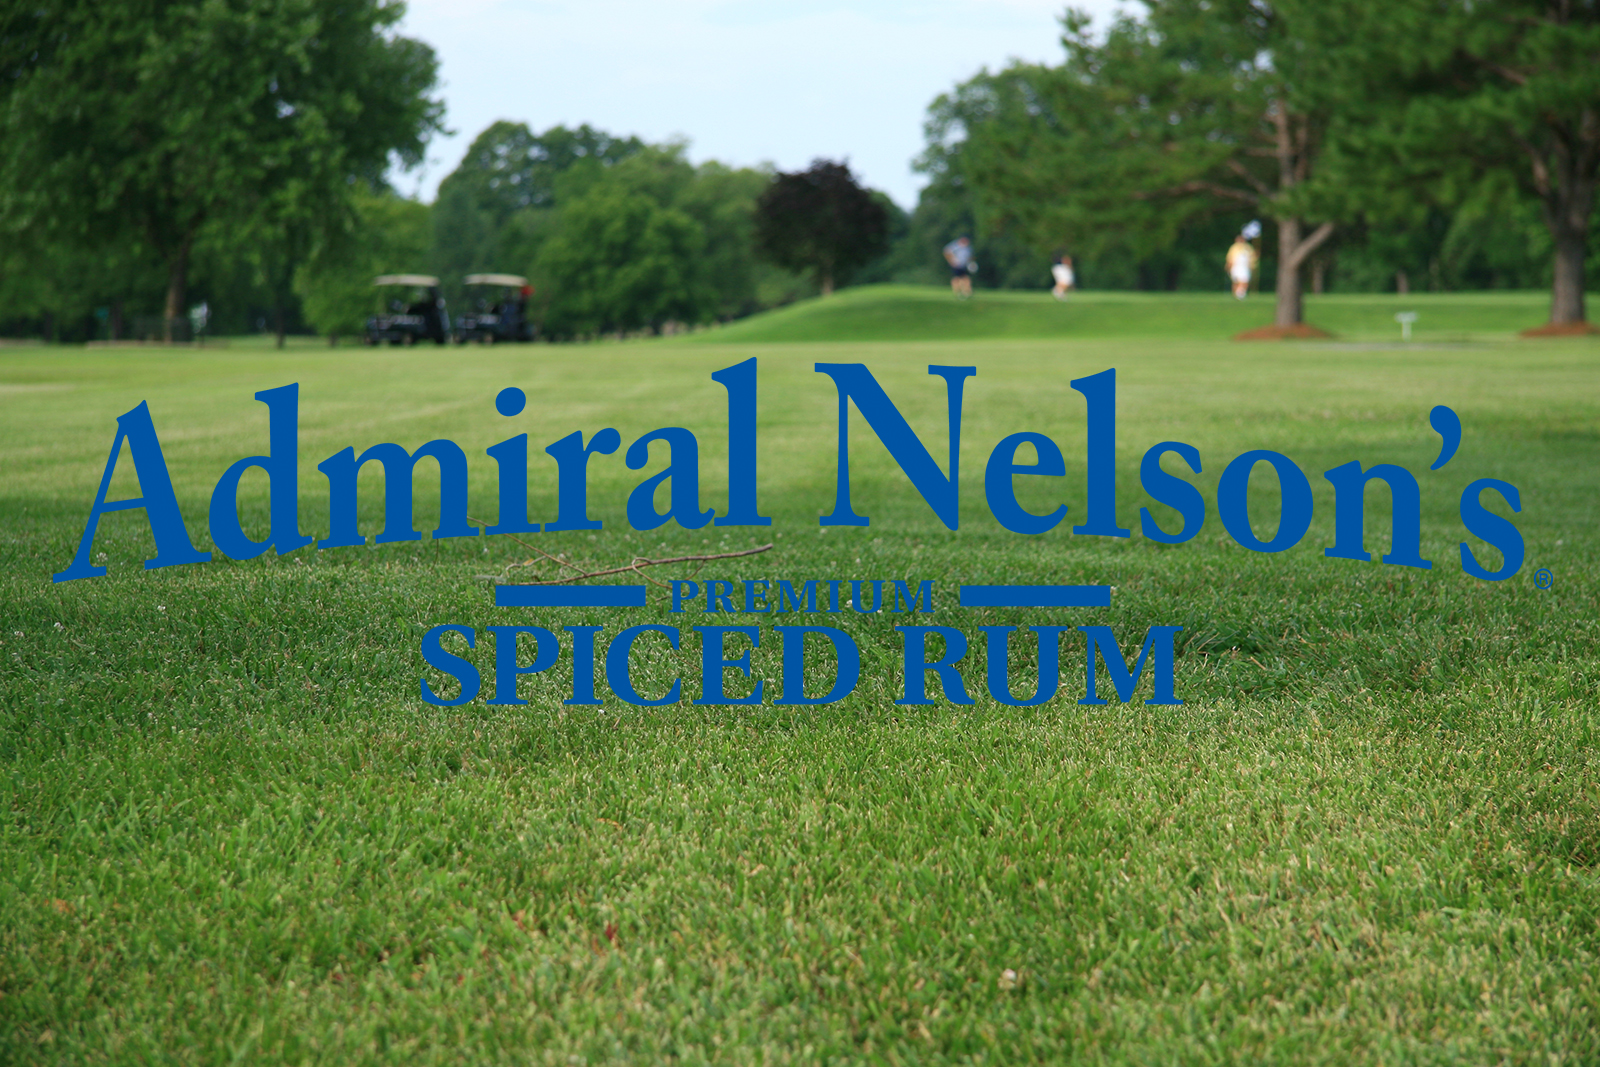 Admiral-Nelsons-19th-Hole-Golf-Altitude.jpg